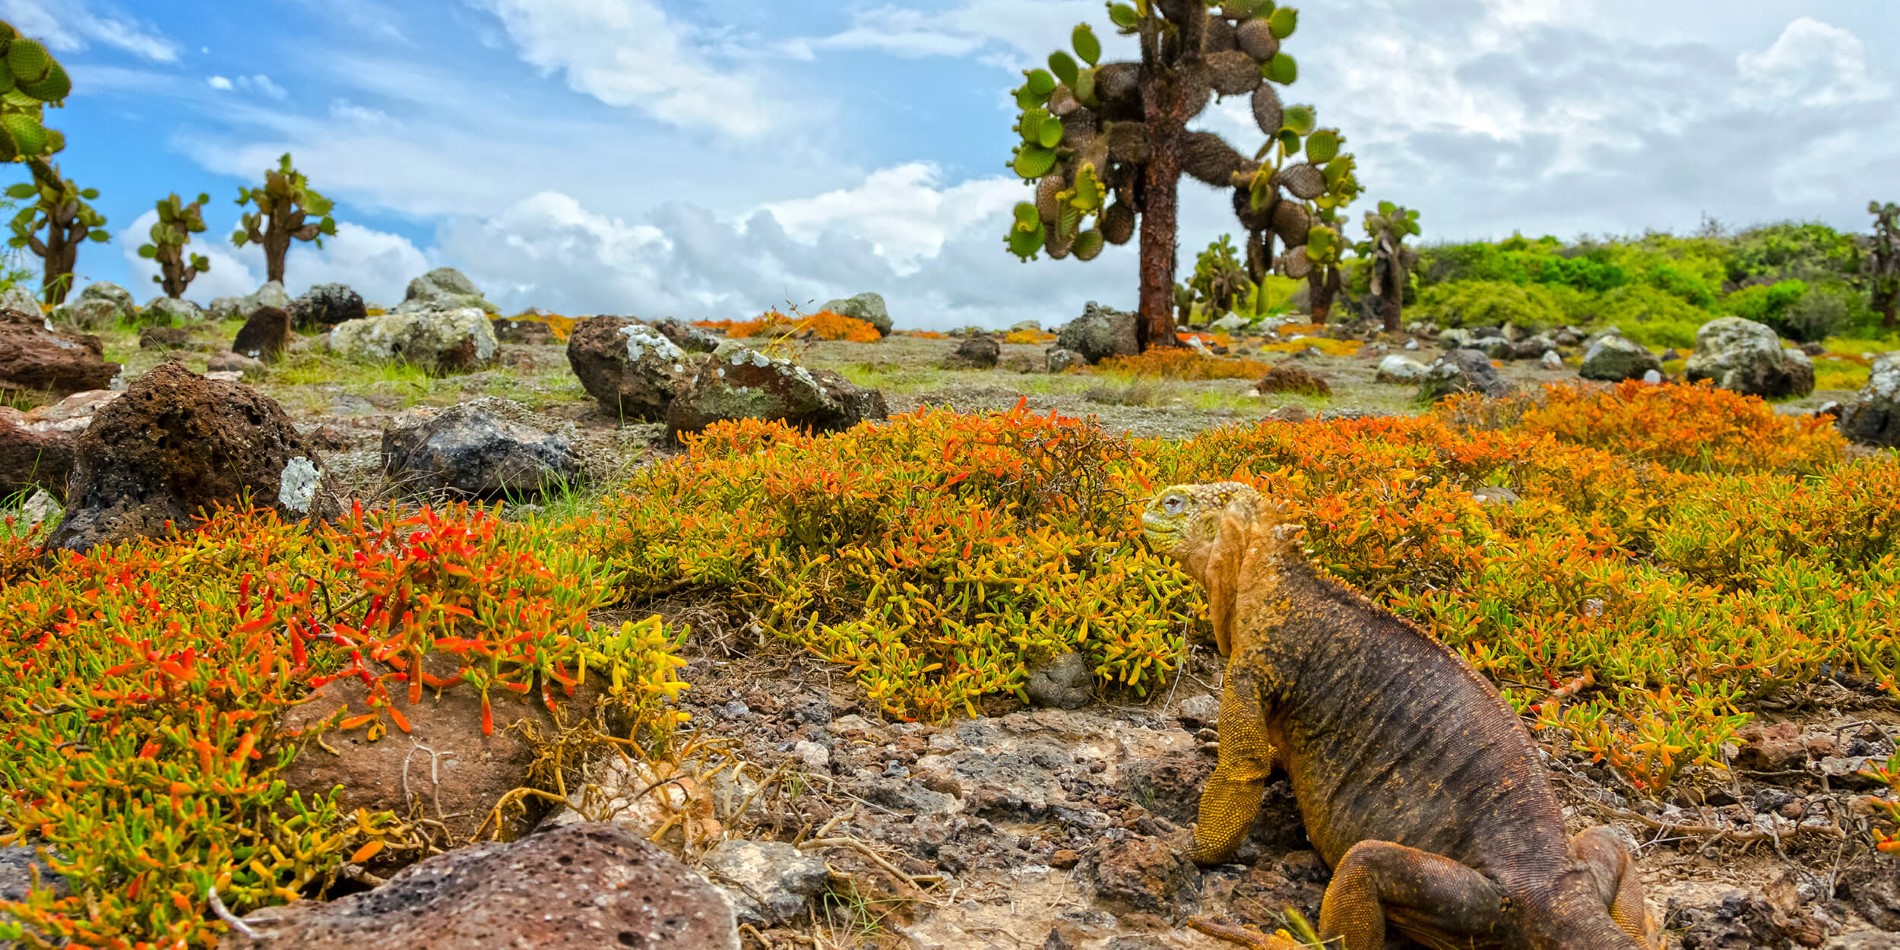 iguana looking out to the landscape cactus and vegetation